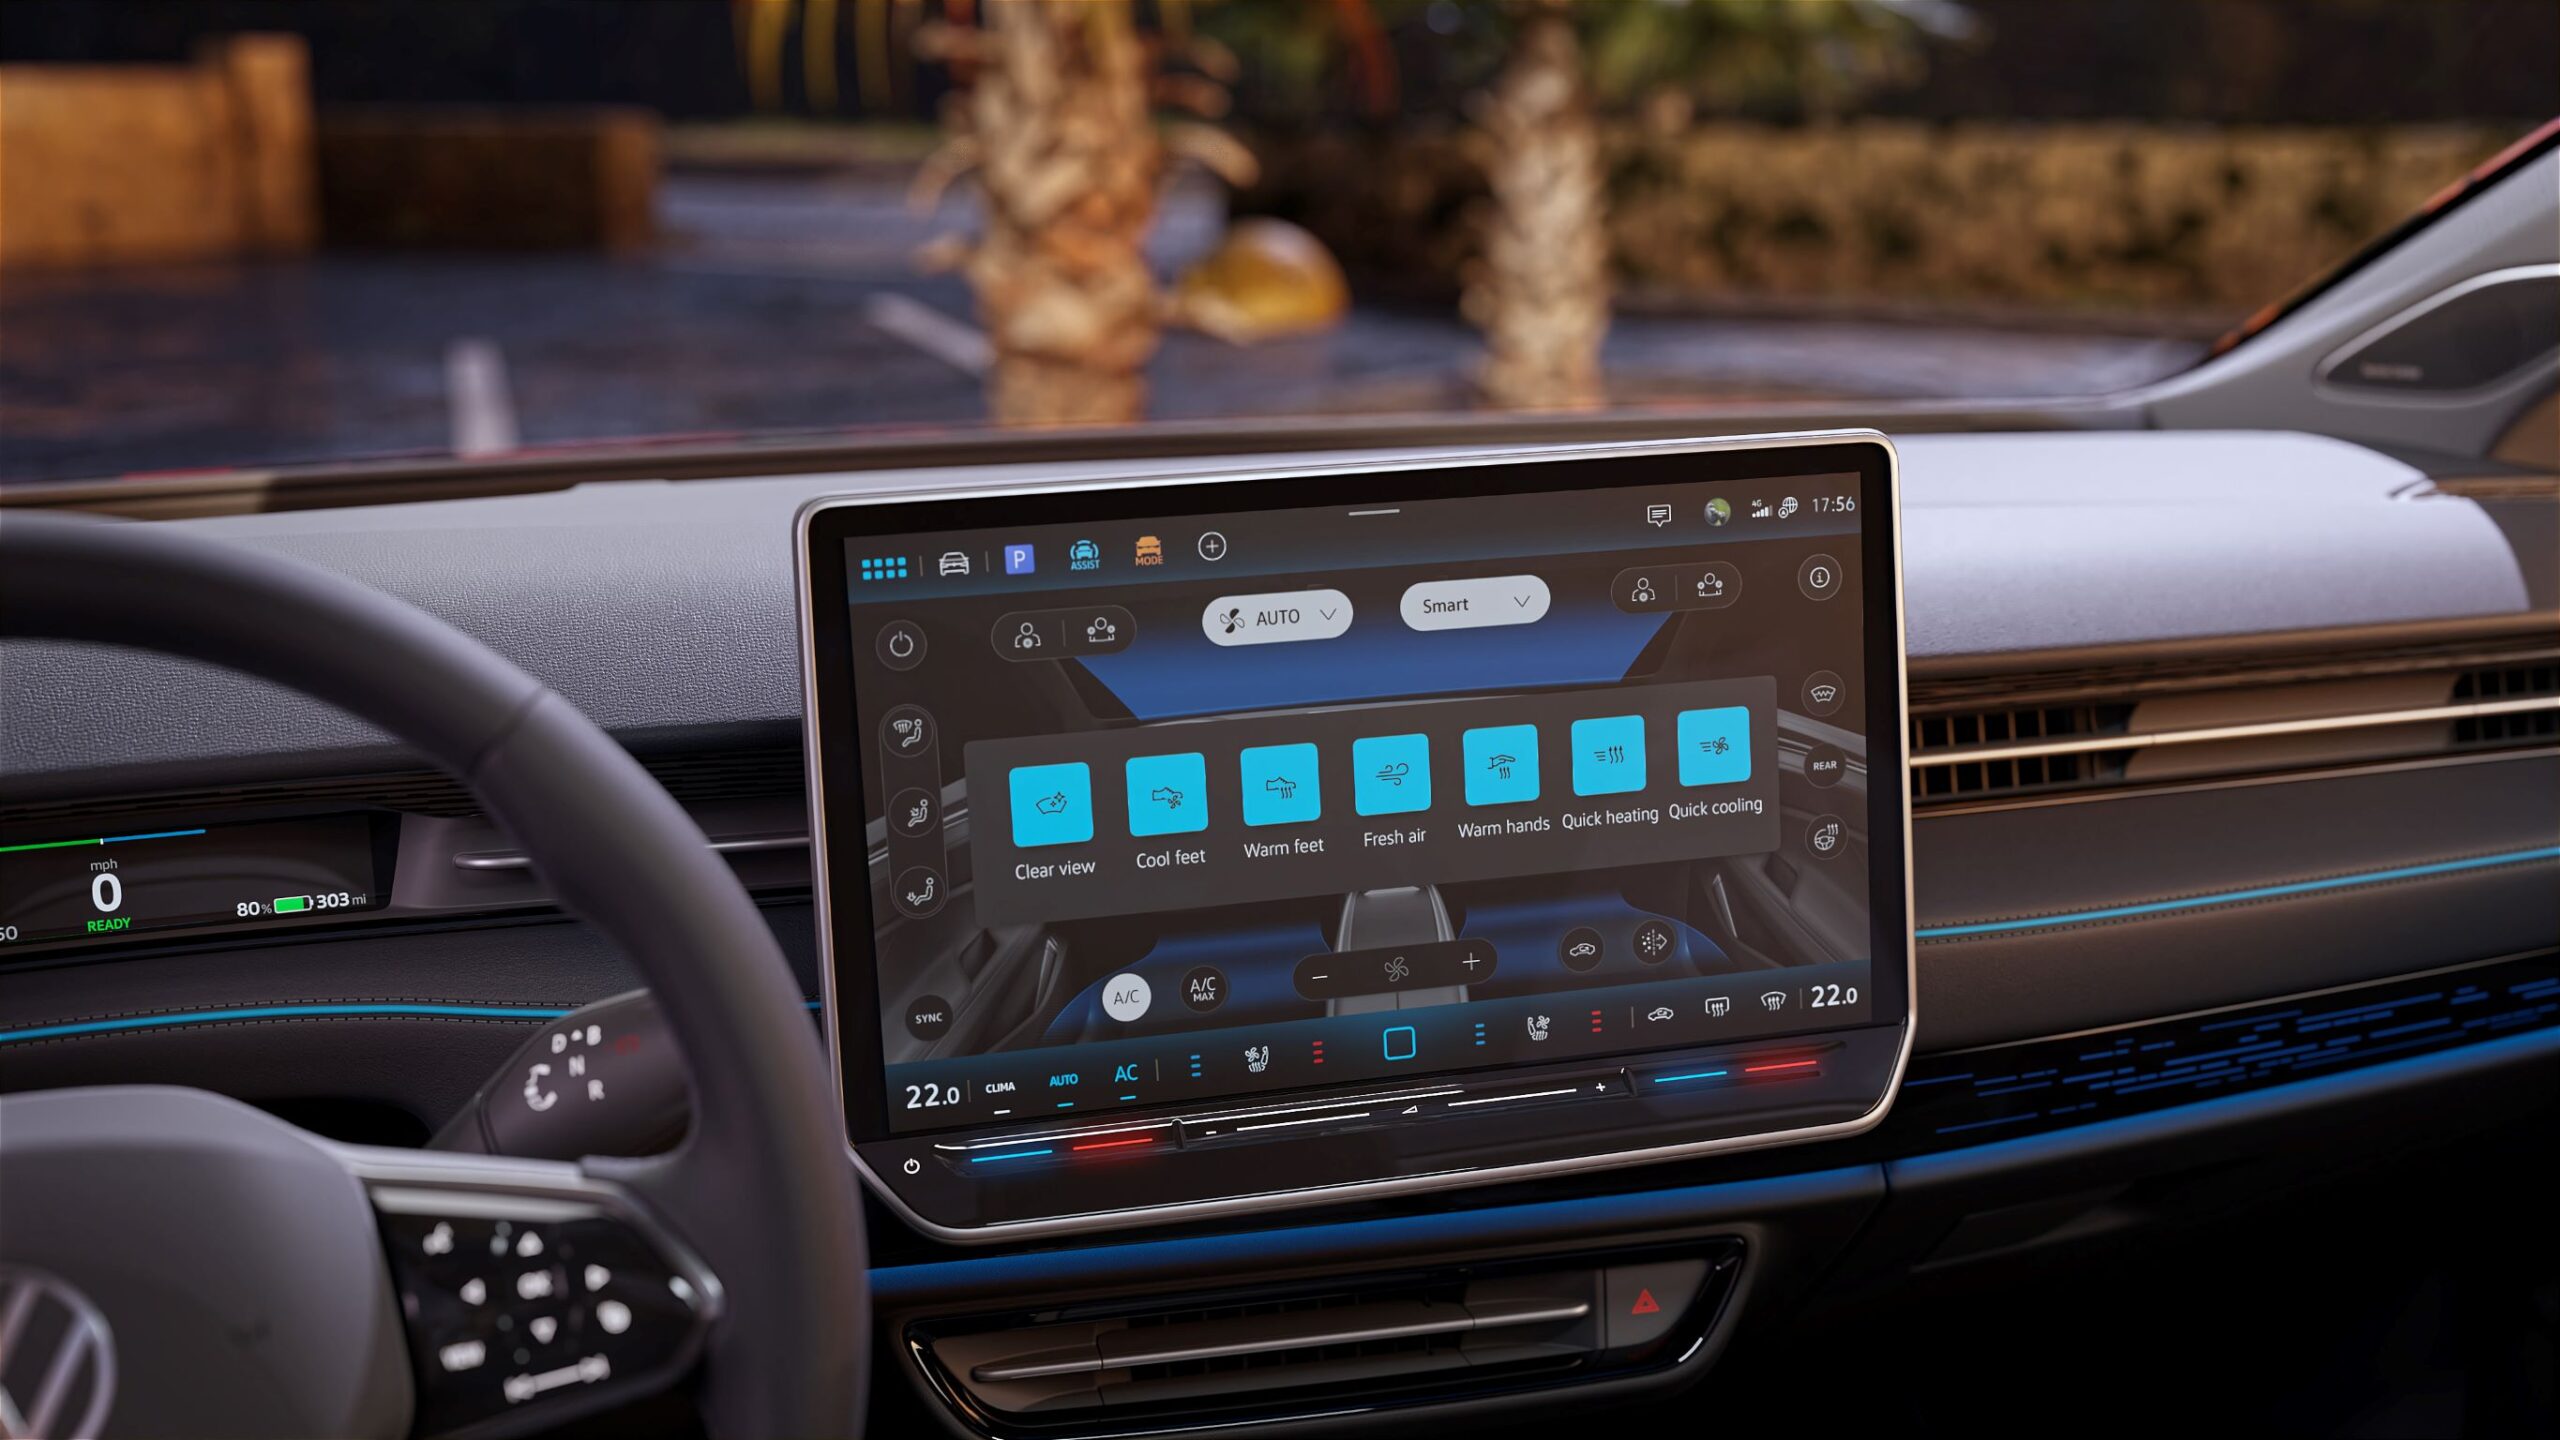 A close-up of the infotainment screen on Volkswagen's new ID.7